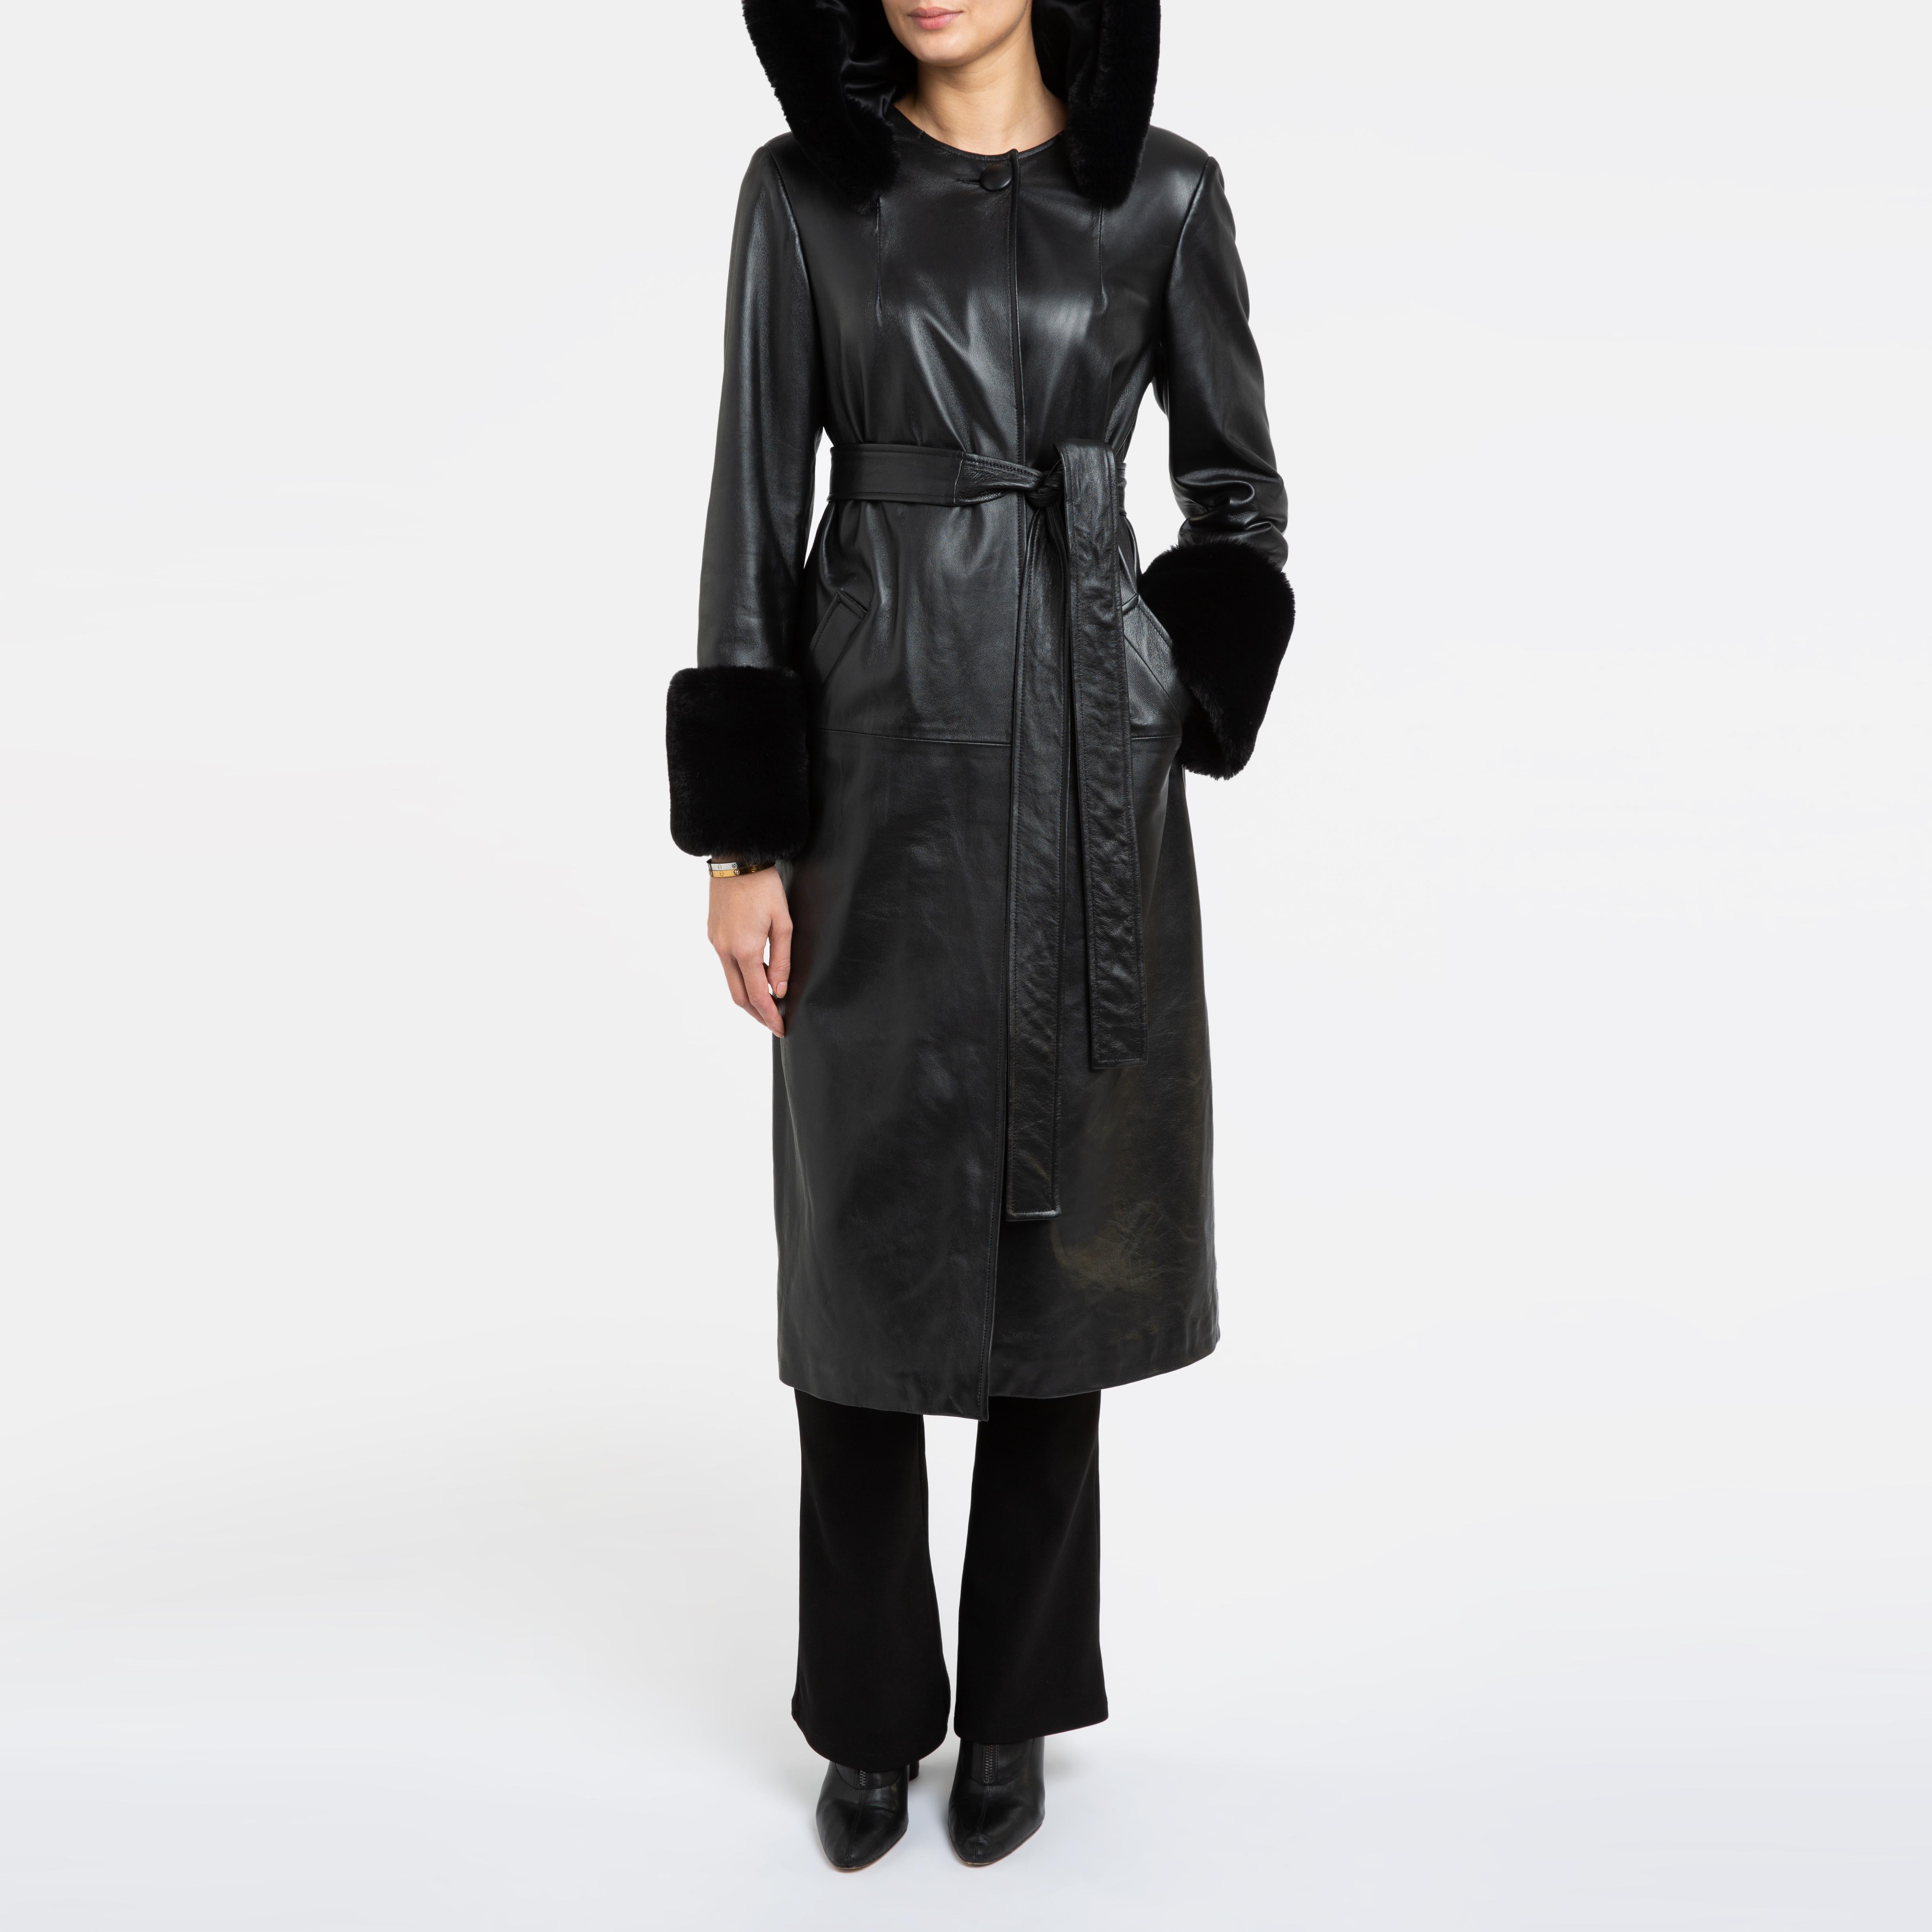 Verheyen London Hooded Leather Trench Coat in Black with Faux Fur - Size uk 14  For Sale 9